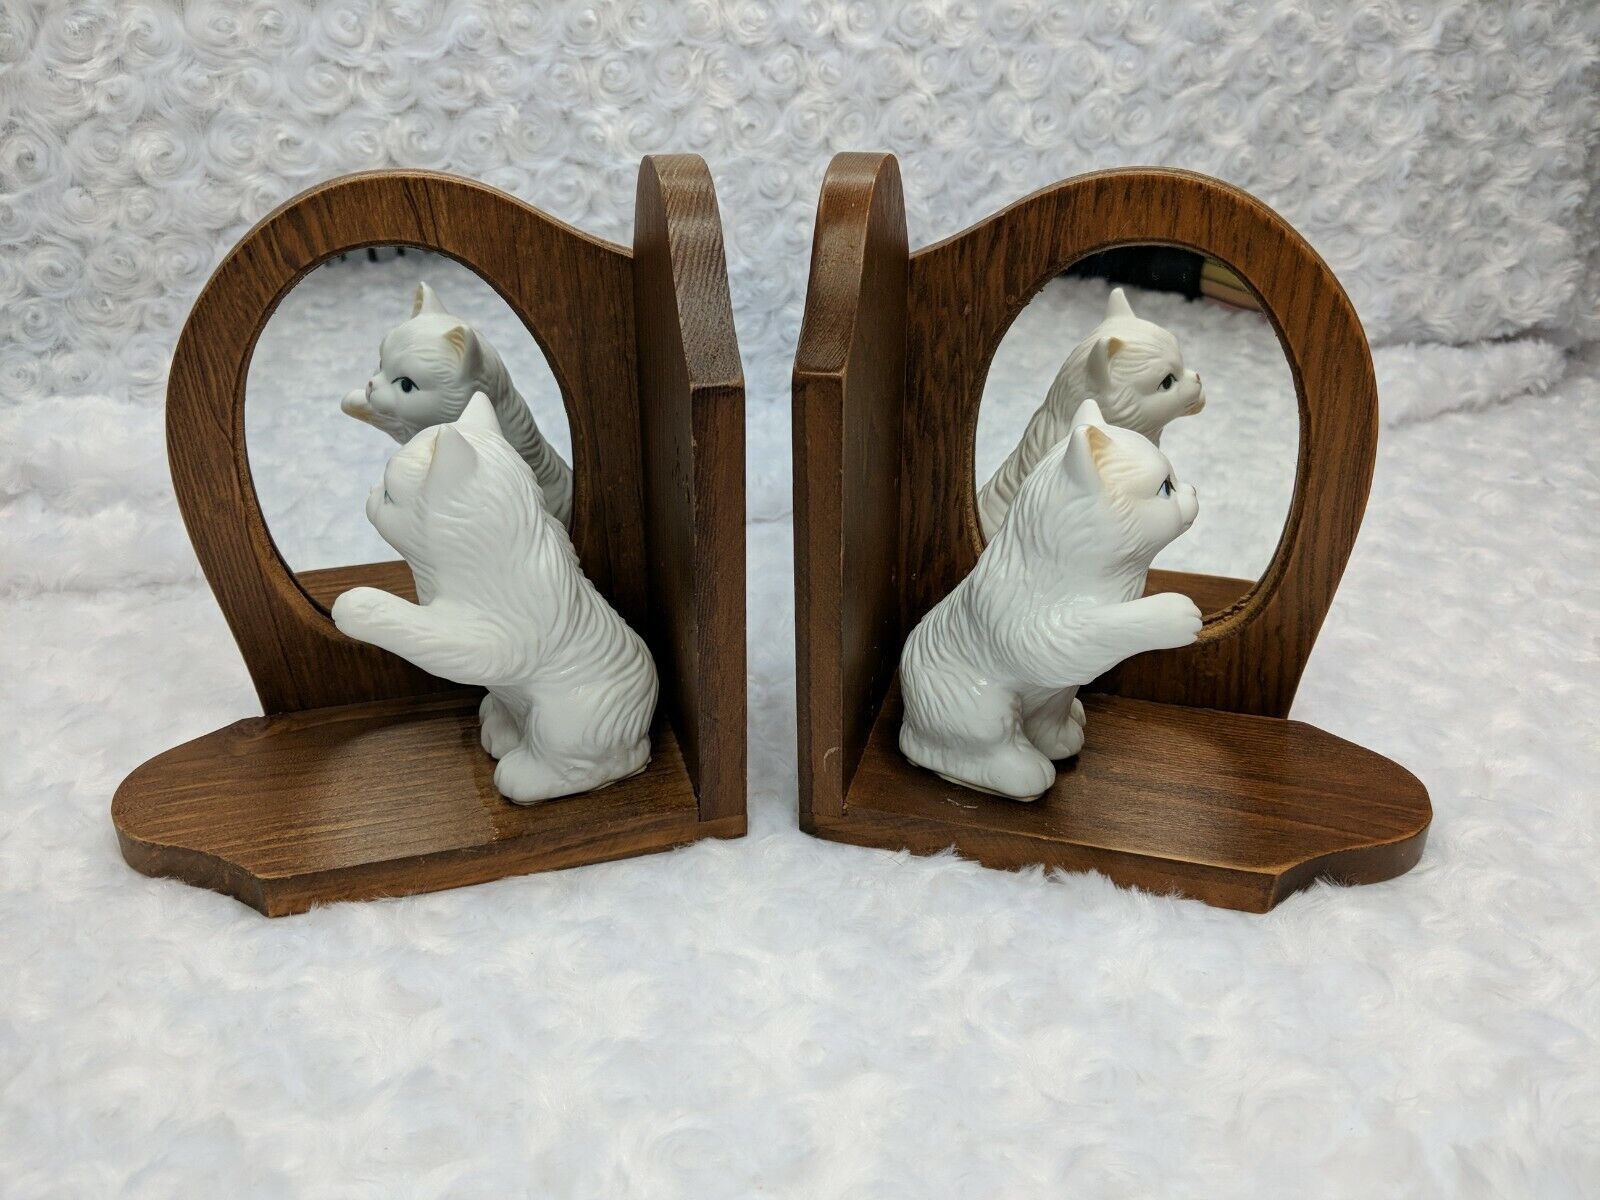 Vintage Pair Of Wood And Ceramic White Cat Kittens Bookends With Mirrors